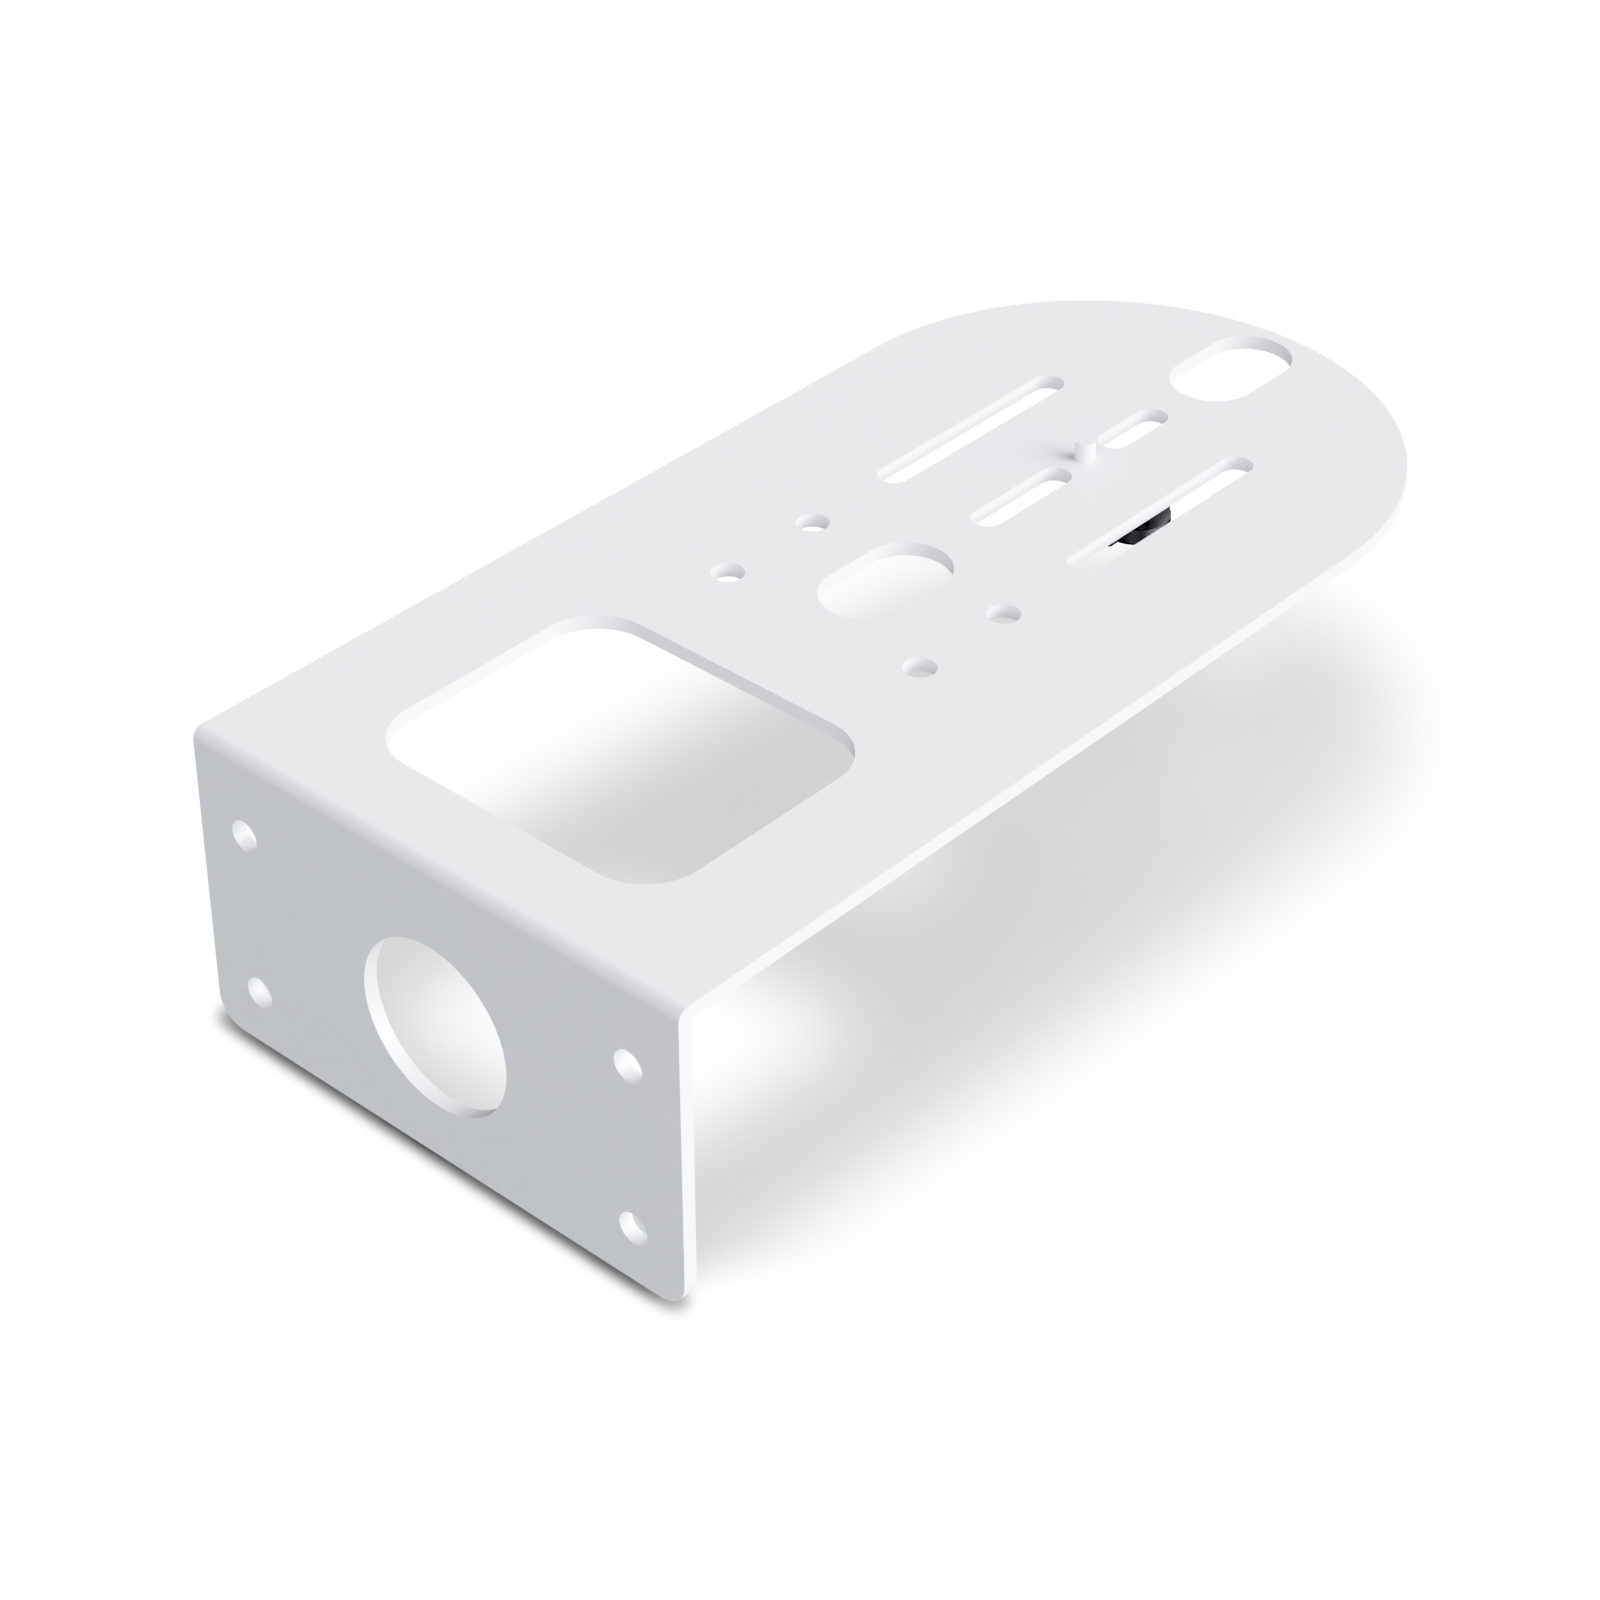 BD-X1-WM-W Wall Mount for X1 and X1 Ultra White